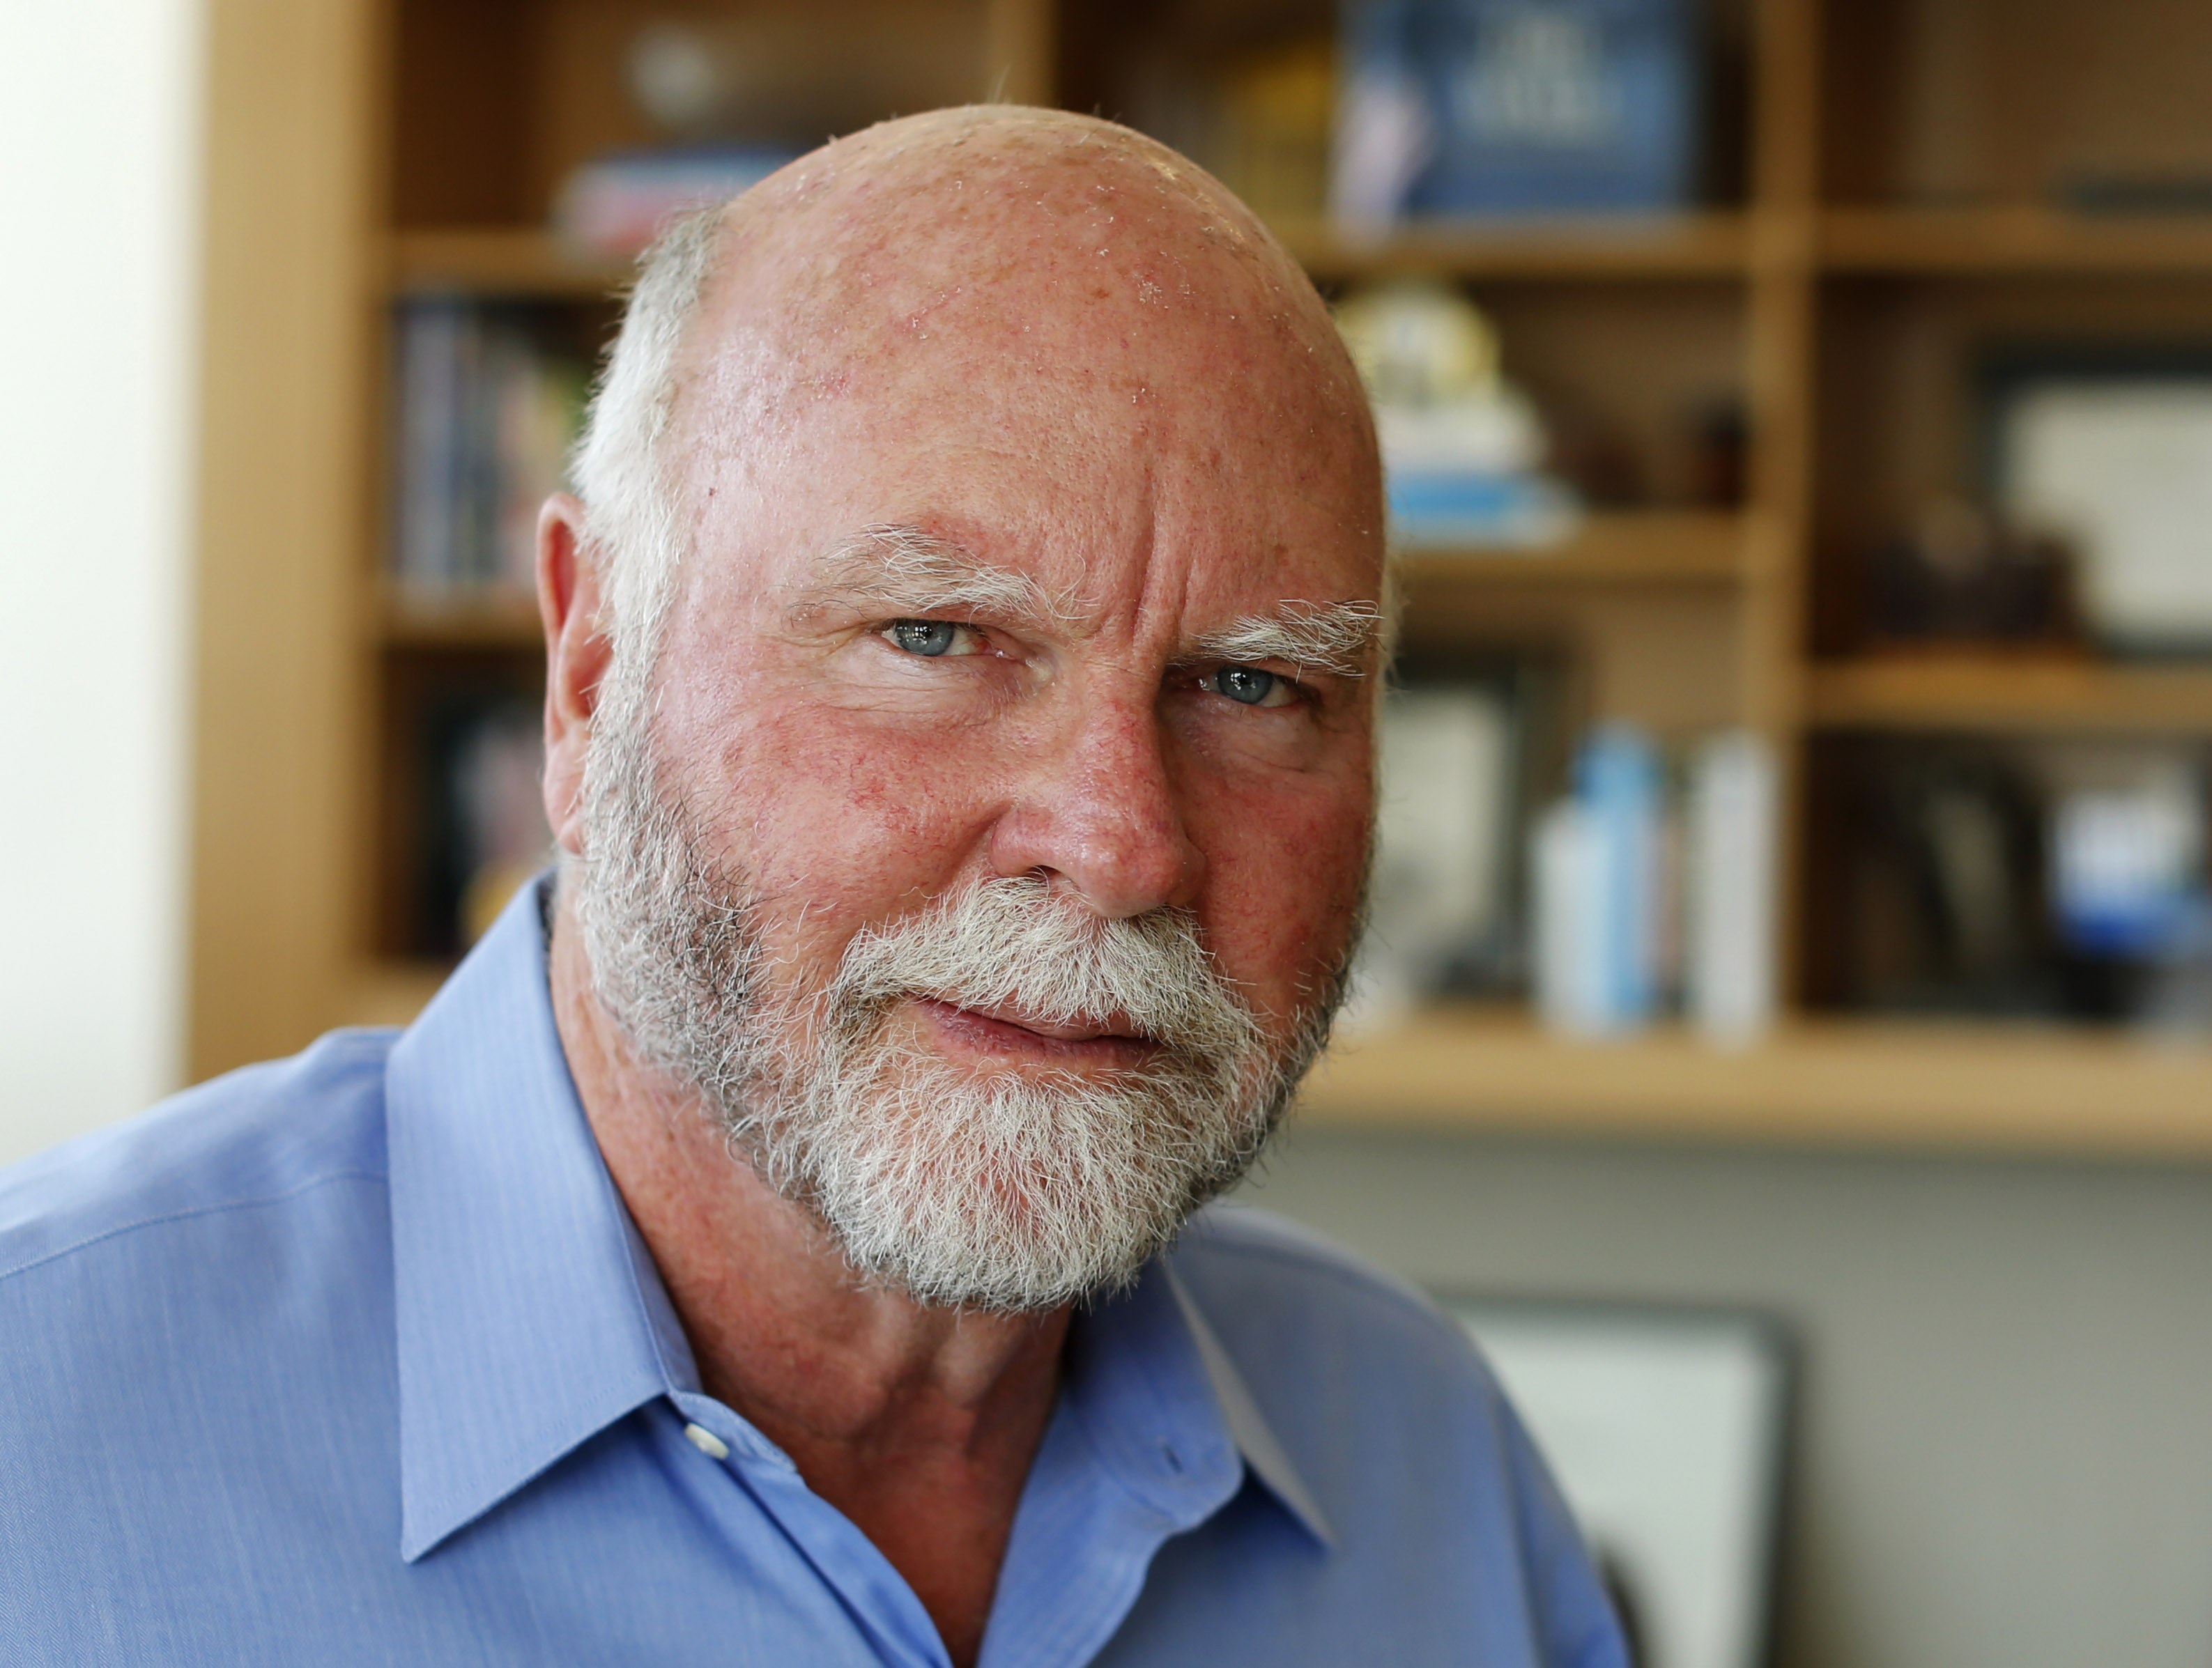 Genetic researcher J. Craig Venter is pictured in his office in La Jolla, California, on March 7. | REUTERS